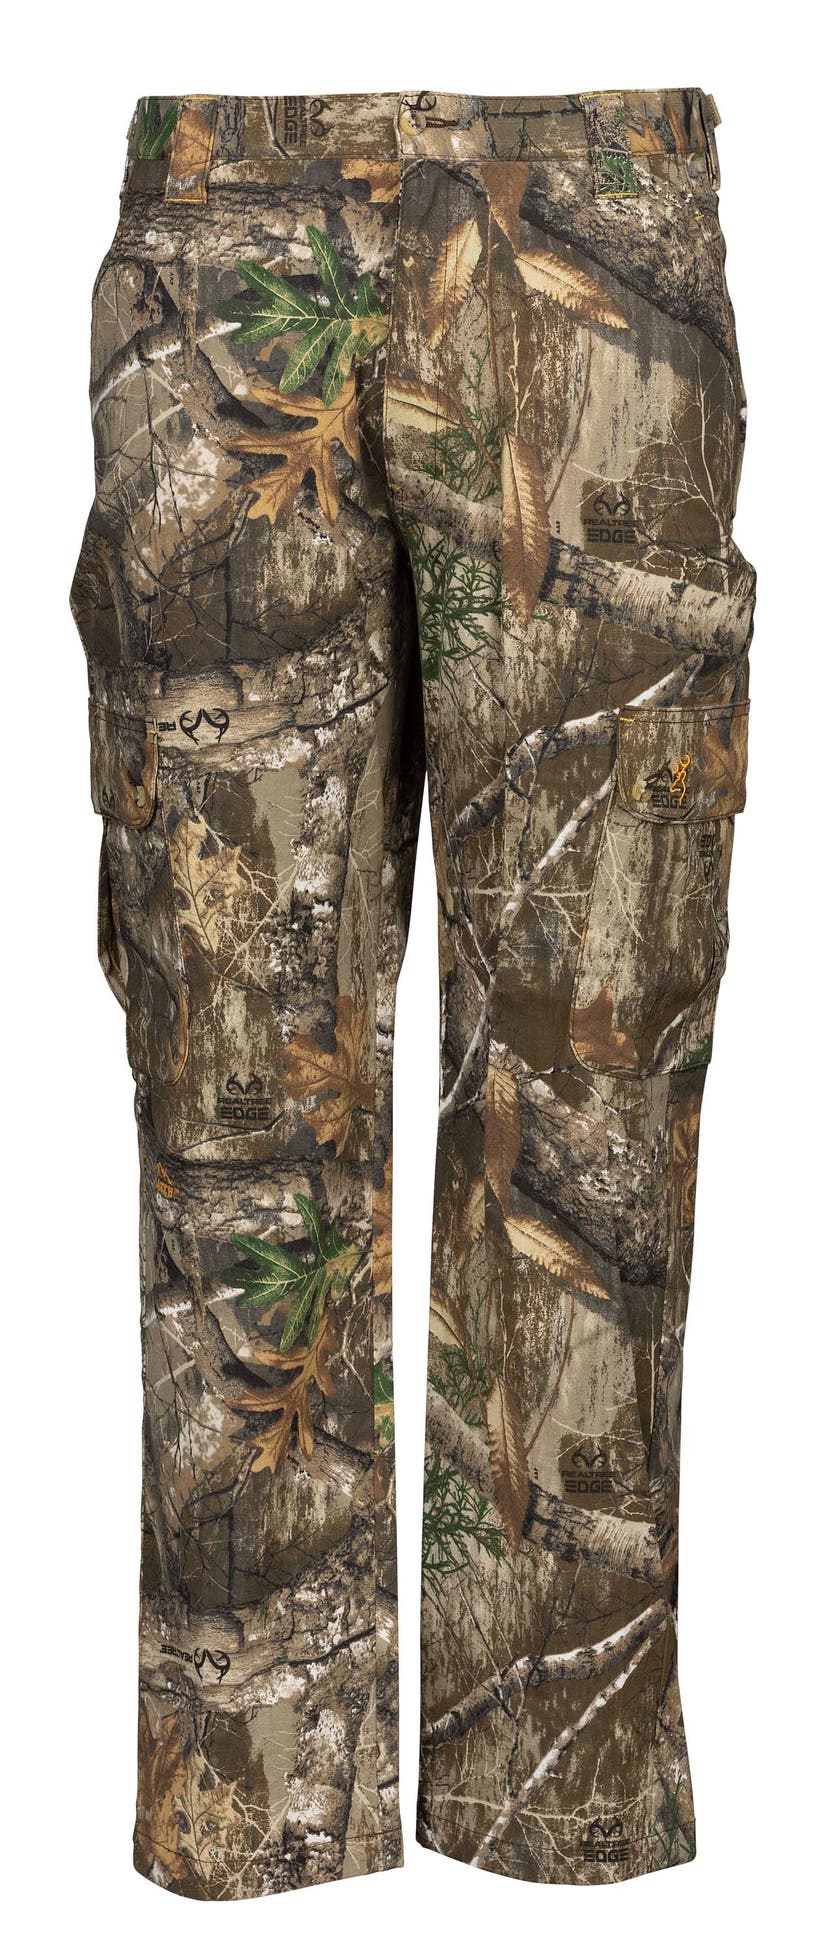 Wasatch Pant - Hunting Clothing - Browning